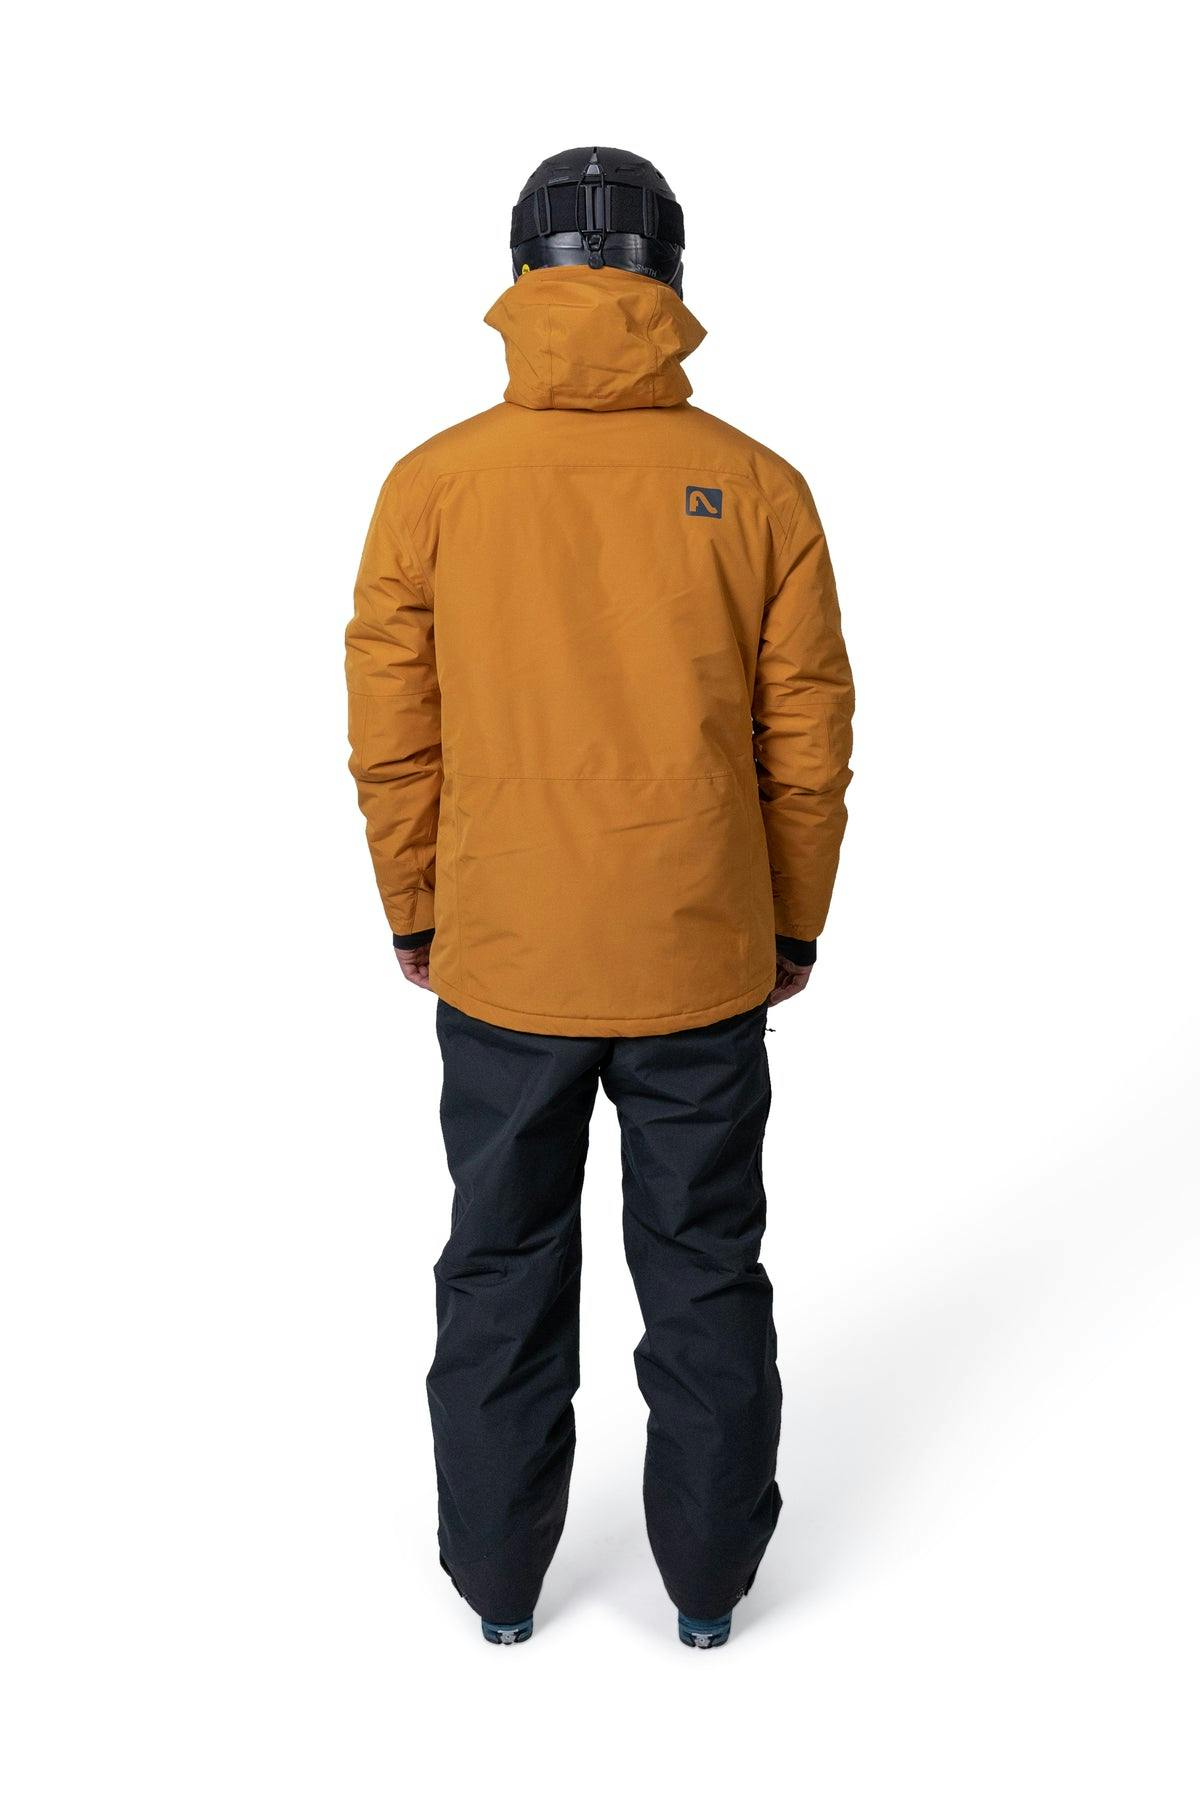 Flylow Men's Roswell 2L Insulated Jacket